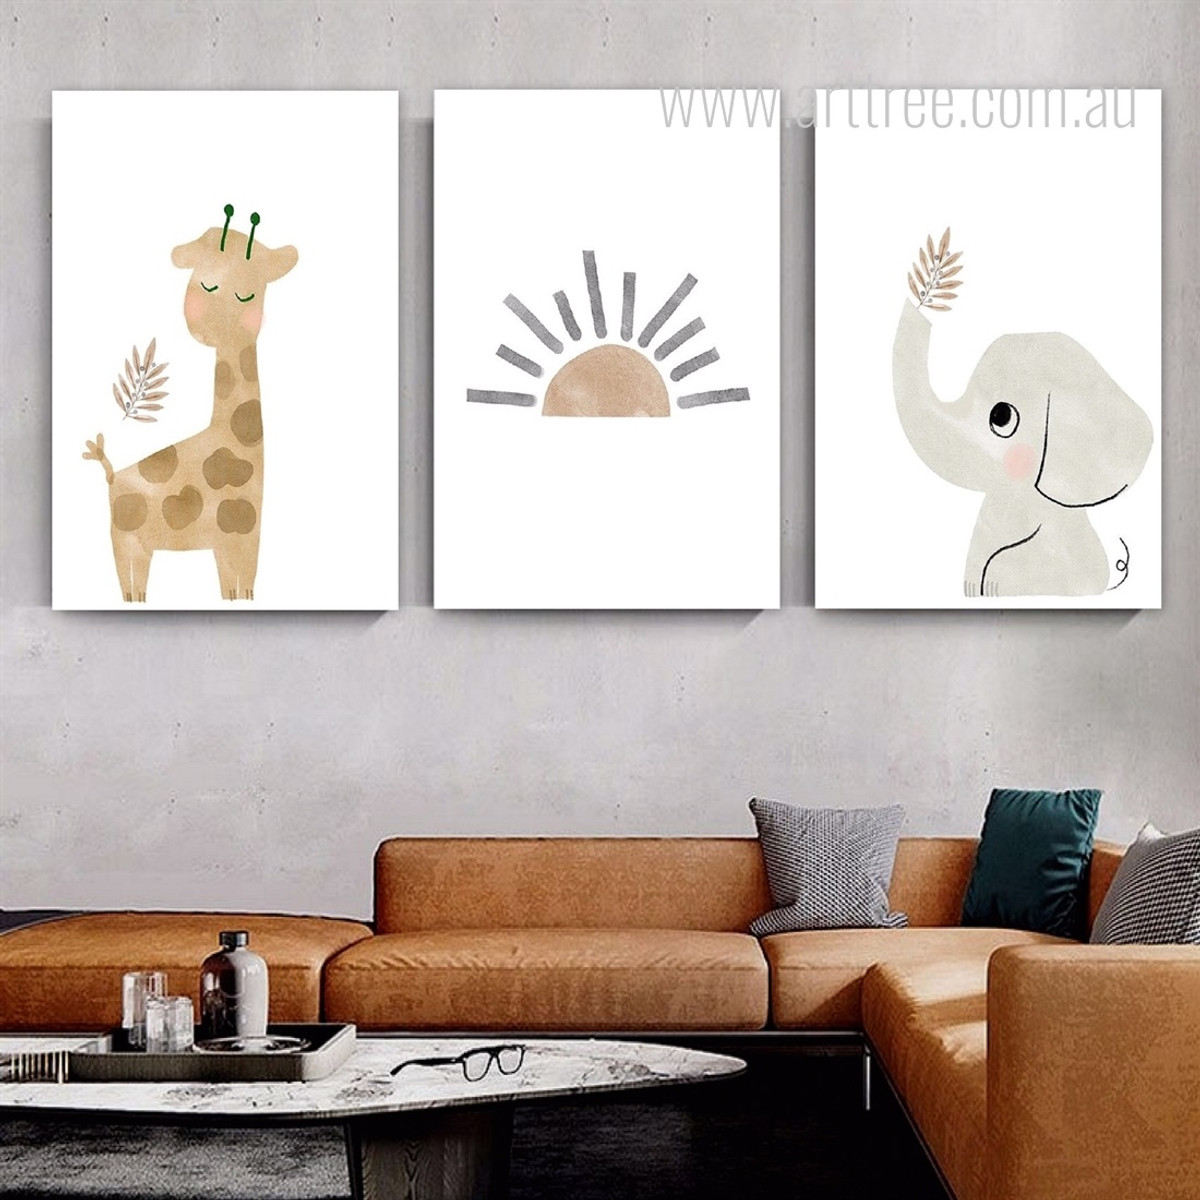 Giraffe Elephant Nursery Stretched Photograph Animal Watercolor 3 Piece Set Canvas Print for Room Wall Art Disposition